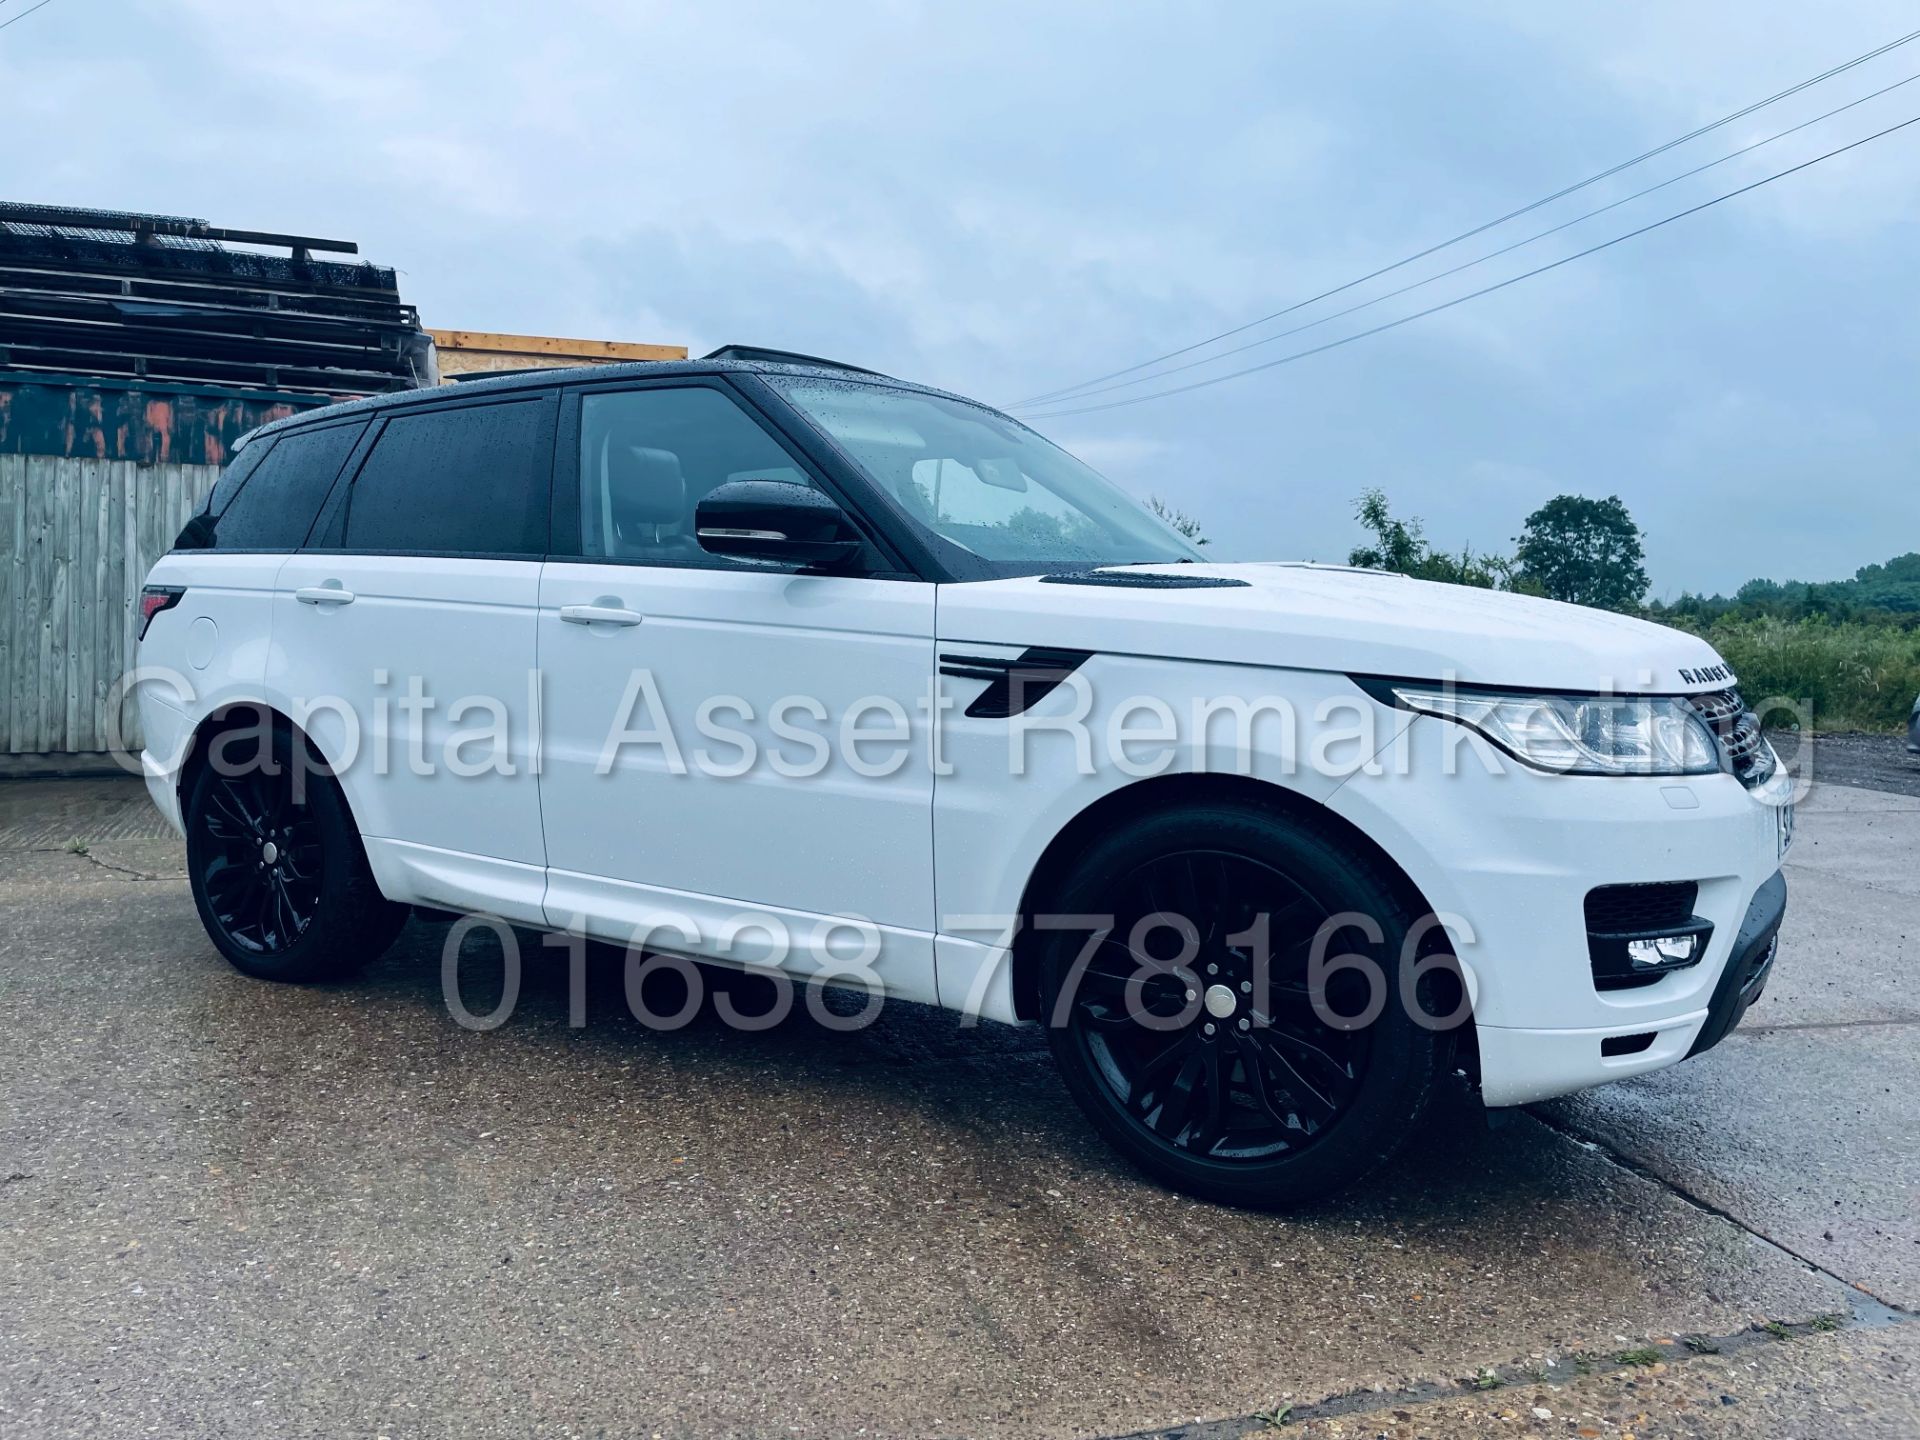 (On Sale) RANGE ROVER SPORT *SPECIAL EDITION* (2014 - FACELIFT) '3.0 TDV6 - AUTO' *NAV & PAN ROOF*